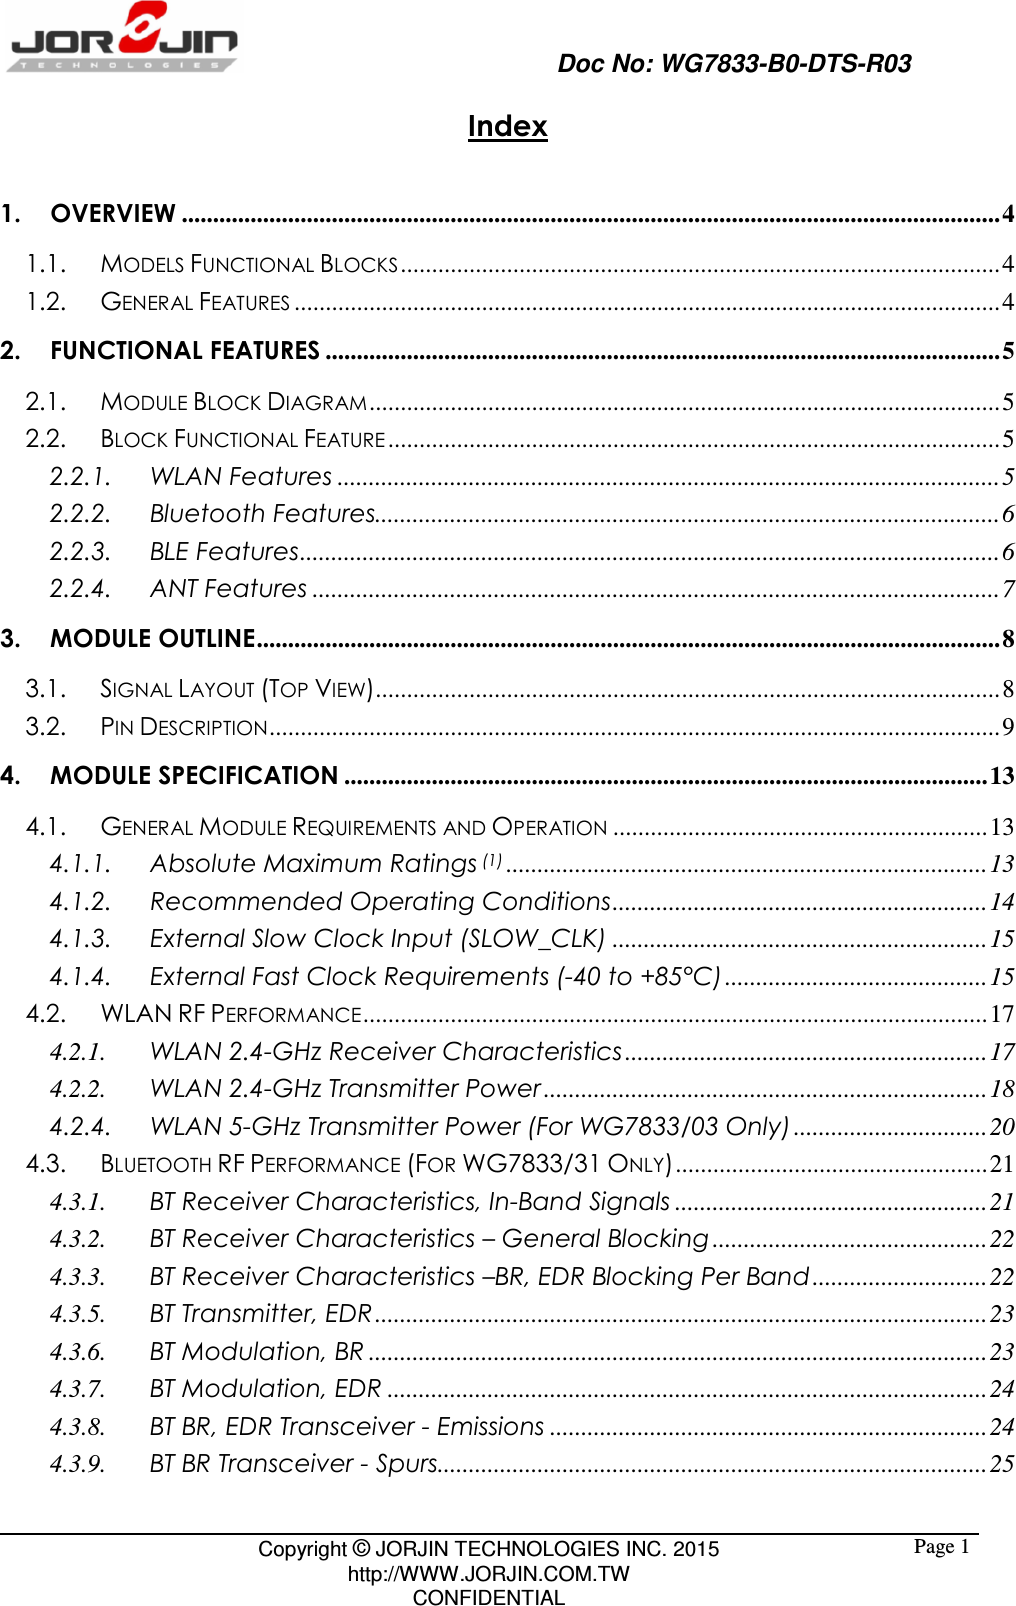                                                   Doc No: WG7833-B0-DTS-R03                                                                                                 Copyright © JORJIN TECHNOLOGIES INC. 2015 http://WWW.JORJIN.COM.TW CONFIDENTIAL  Page 1Index  1. OVERVIEW ................................................................................................................................... 4 1.1. MODELS FUNCTIONAL BLOCKS ................................................................................................ 4 1.2. GENERAL FEATURES ................................................................................................................. 4 2. FUNCTIONAL FEATURES ............................................................................................................ 5 2.1. MODULE BLOCK DIAGRAM ..................................................................................................... 5 2.2. BLOCK FUNCTIONAL FEATURE .................................................................................................. 5 2.2.1. WLAN Features .......................................................................................................... 5 2.2.2. Bluetooth Features.................................................................................................... 6 2.2.3. BLE Features ................................................................................................................ 6 2.2.4. ANT Features .............................................................................................................. 7 3. MODULE OUTLINE ....................................................................................................................... 8 3.1. SIGNAL LAYOUT (TOP VIEW).................................................................................................... 8 3.2. PIN DESCRIPTION ..................................................................................................................... 9 4. MODULE SPECIFICATION ....................................................................................................... 13 4.1. GENERAL MODULE REQUIREMENTS AND OPERATION ............................................................ 13 4.1.1. Absolute Maximum Ratings (1) ............................................................................. 13 4.1.2. Recommended Operating Conditions ............................................................ 14 4.1.3. External Slow Clock Input (SLOW_CLK) ............................................................ 15 4.1.4. External Fast Clock Requirements (-40 to +85°C) .......................................... 15 4.2. WLAN RF PERFORMANCE .................................................................................................... 17 4.2.1. WLAN 2.4-GHz Receiver Characteristics .......................................................... 17 4.2.2. WLAN 2.4-GHz Transmitter Power ....................................................................... 18 4.2.4. WLAN 5-GHz Transmitter Power (For WG7833/03 Only) ............................... 20 4.3. BLUETOOTH RF PERFORMANCE (FOR WG7833/31 ONLY) .................................................. 21 4.3.1. BT Receiver Characteristics, In-Band Signals .................................................. 21 4.3.2. BT Receiver Characteristics – General Blocking ............................................ 22 4.3.3. BT Receiver Characteristics –BR, EDR Blocking Per Band ............................ 22 4.3.5. BT Transmitter, EDR .................................................................................................. 23 4.3.6. BT Modulation, BR ................................................................................................... 23 4.3.7. BT Modulation, EDR ................................................................................................ 24 4.3.8. BT BR, EDR Transceiver - Emissions ...................................................................... 24 4.3.9. BT BR Transceiver - Spurs........................................................................................ 25 